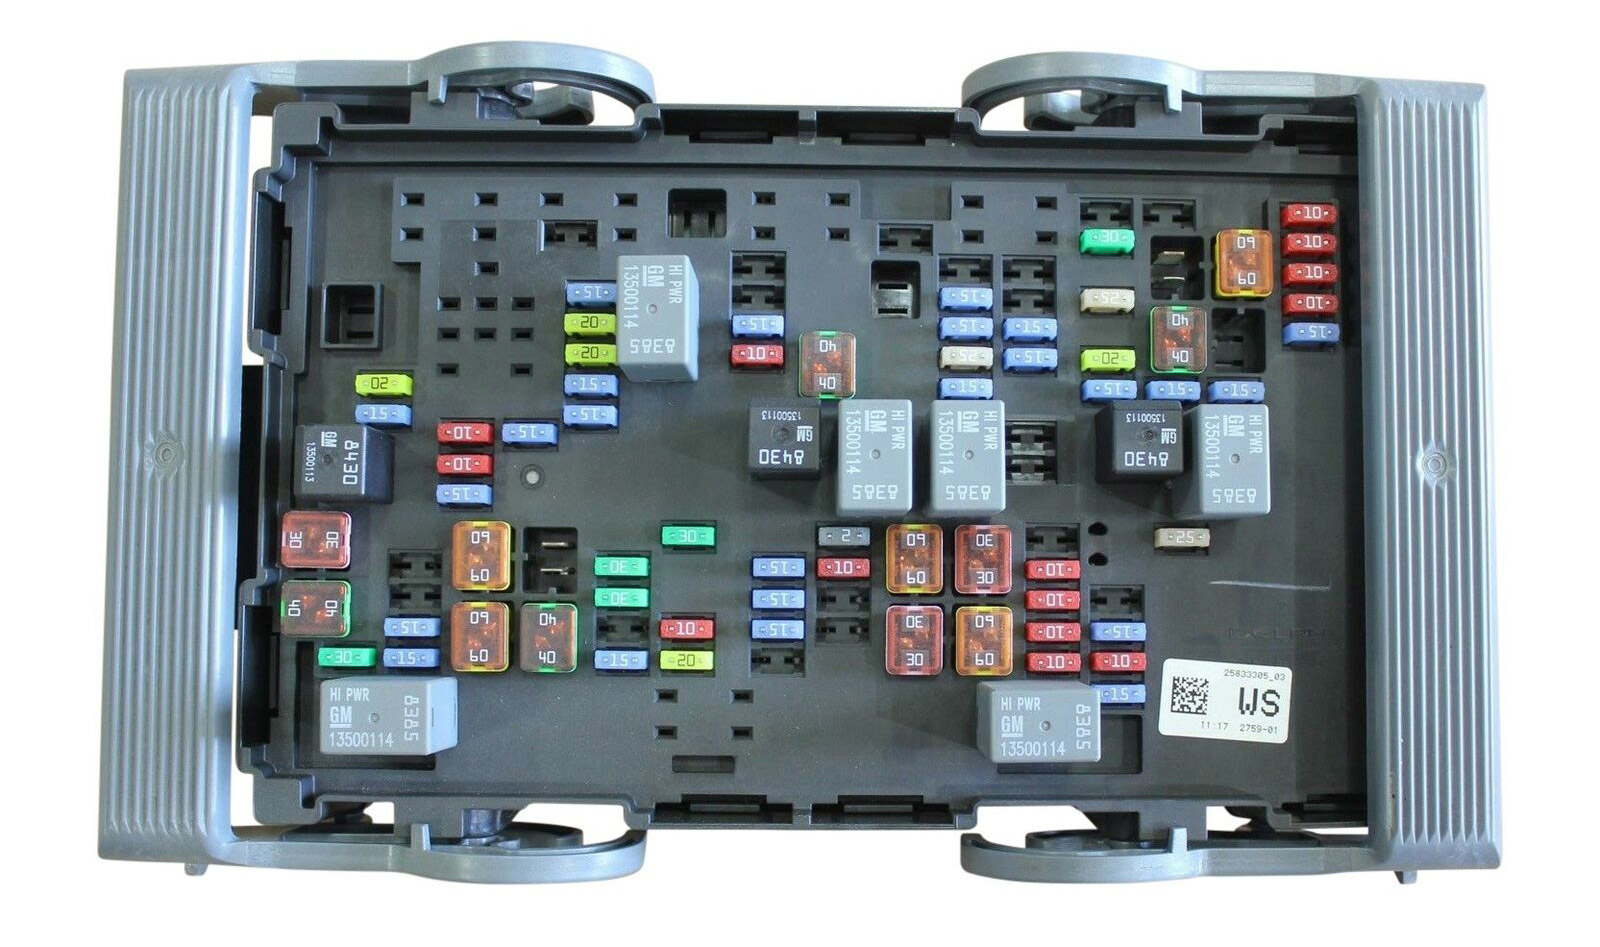 The typical fuse box is designed to make inspecting and replacing fuses as easy as possible.